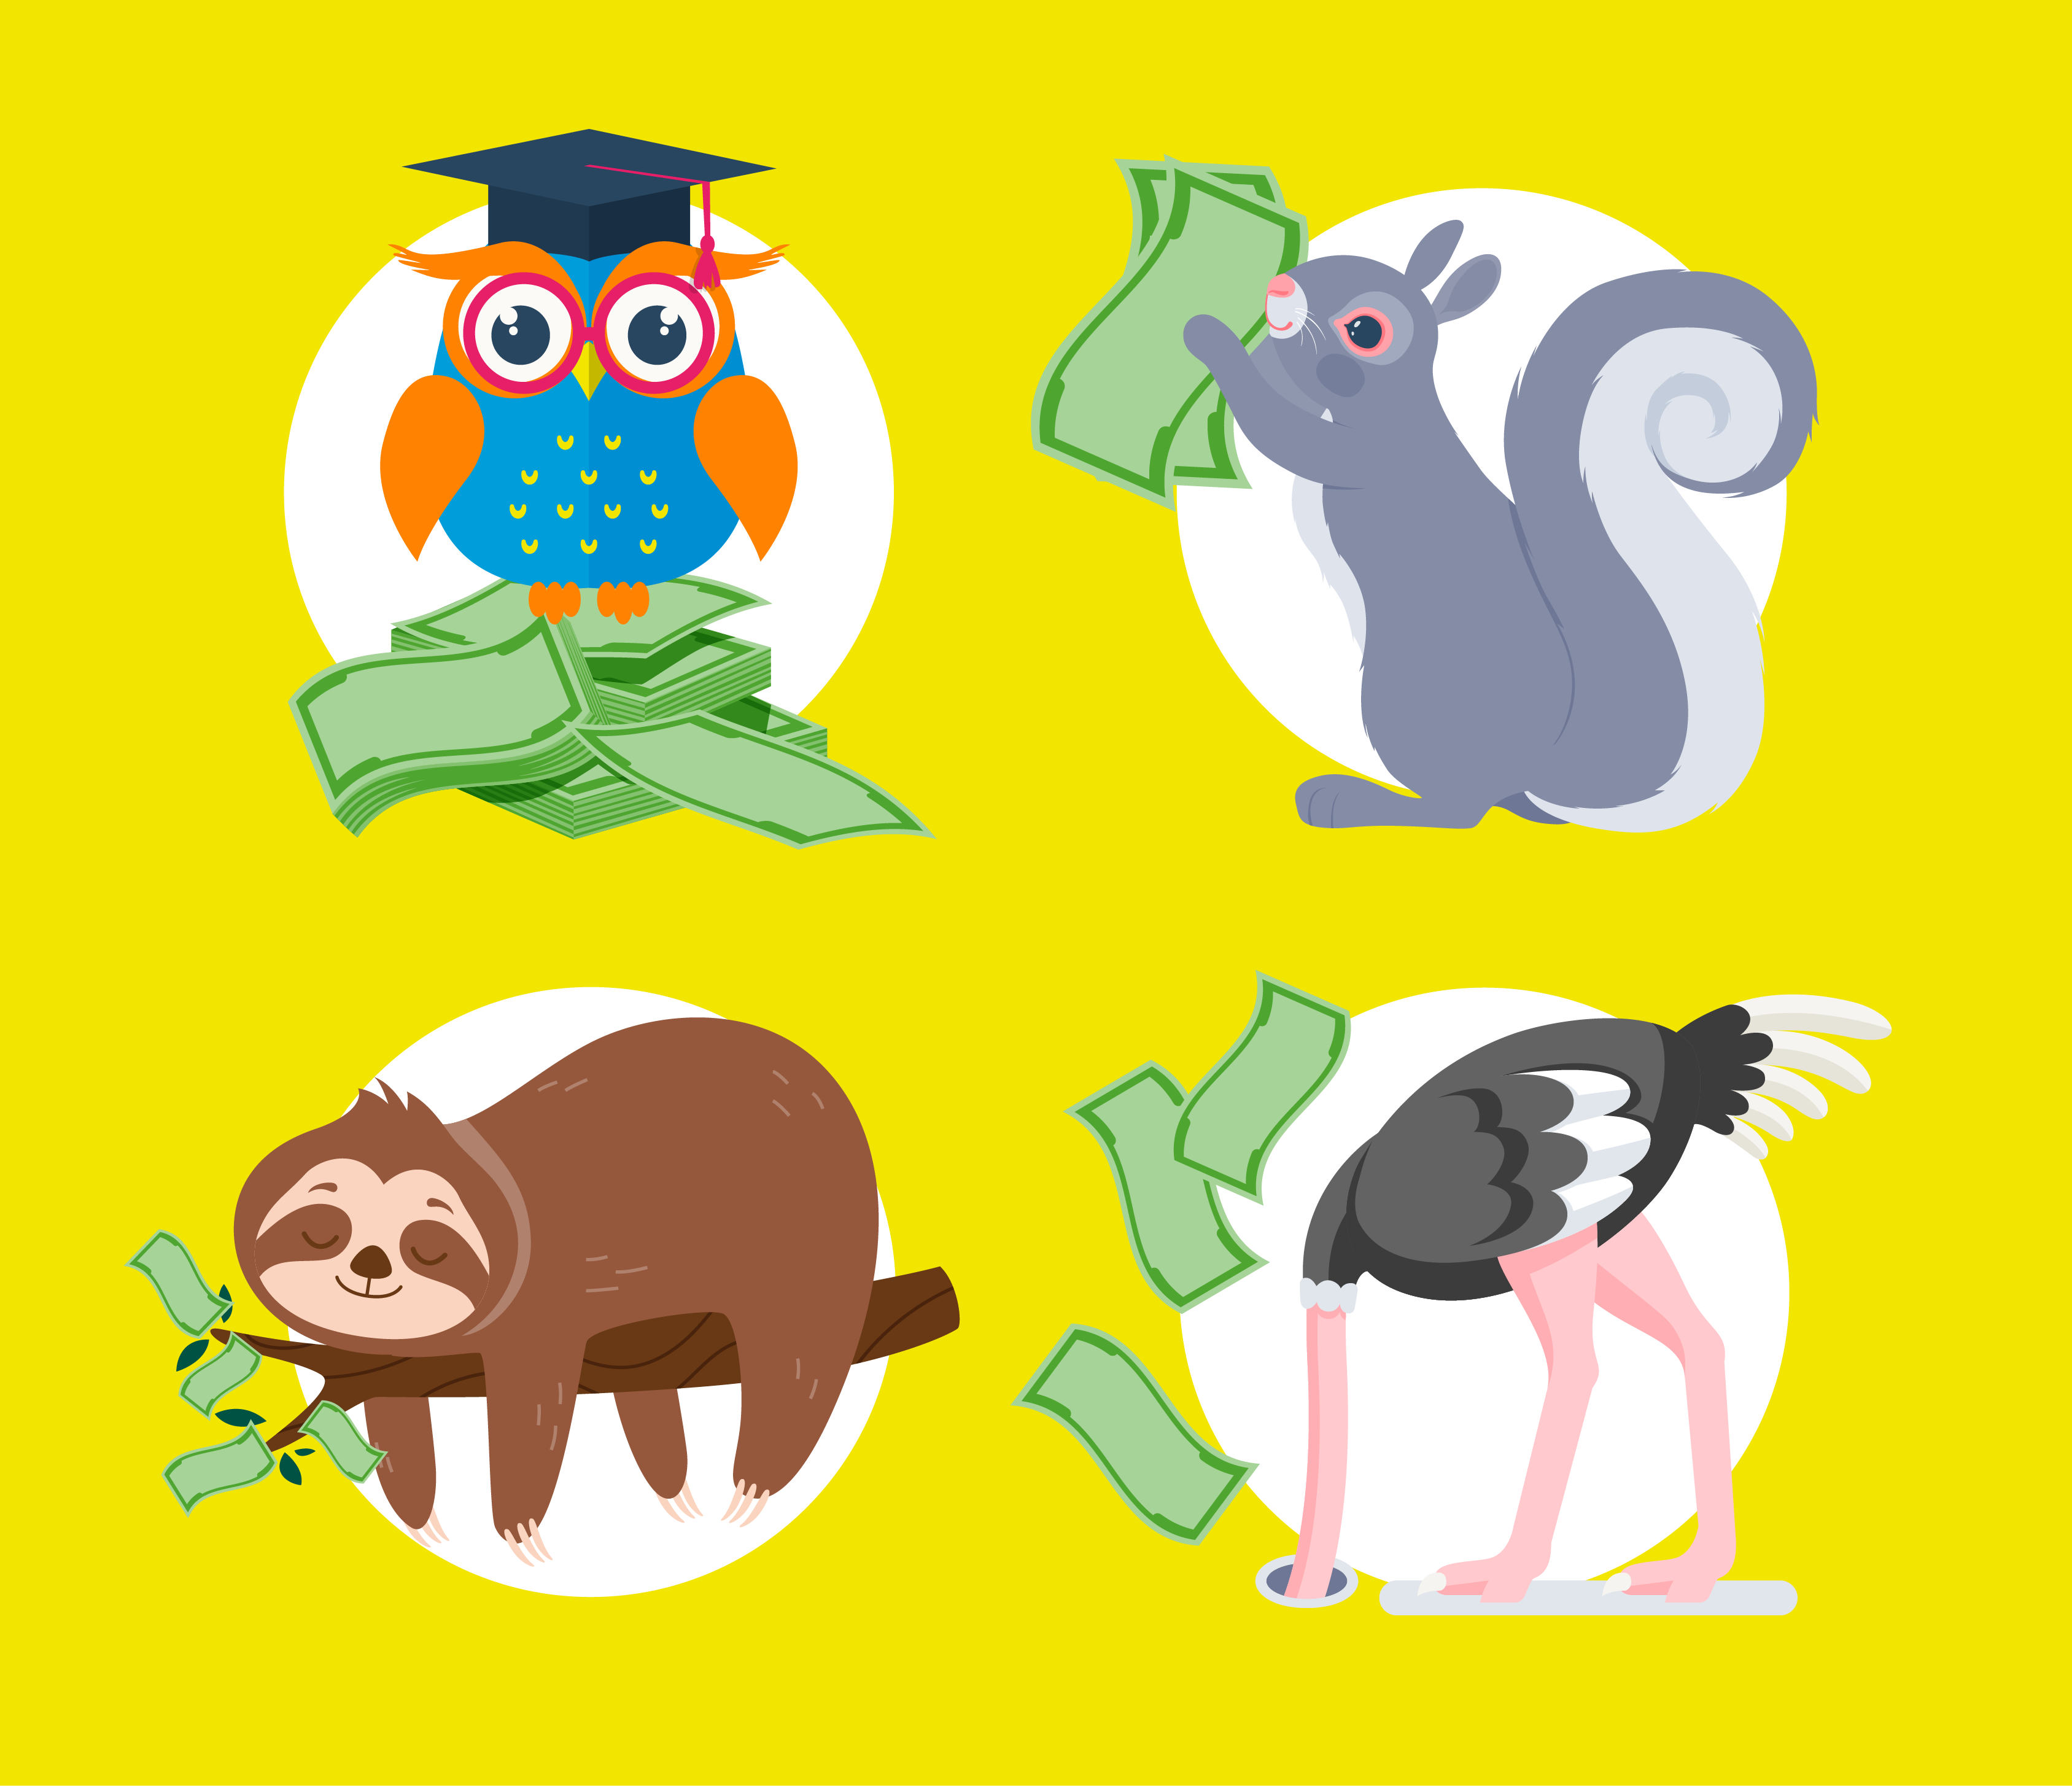 Left to right: Colourful illustrations of an owl, a squirrel, a sloth, and an ostrich